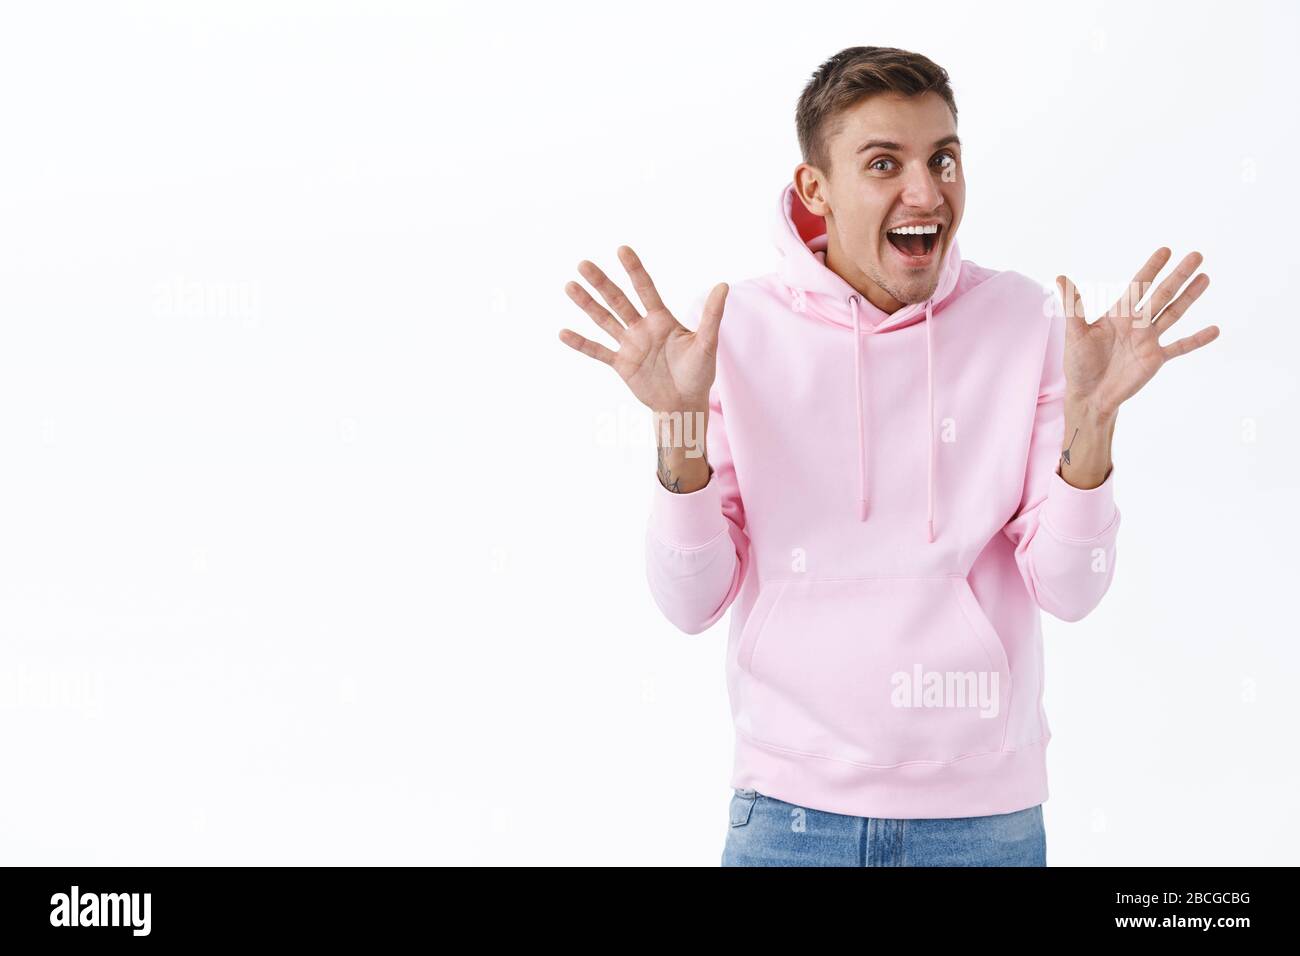 Excited cheerful man with blond hair, make jazz hands, waving palms in hello or hi gesture, saying surprise as congratulating friend with pride month Stock Photo